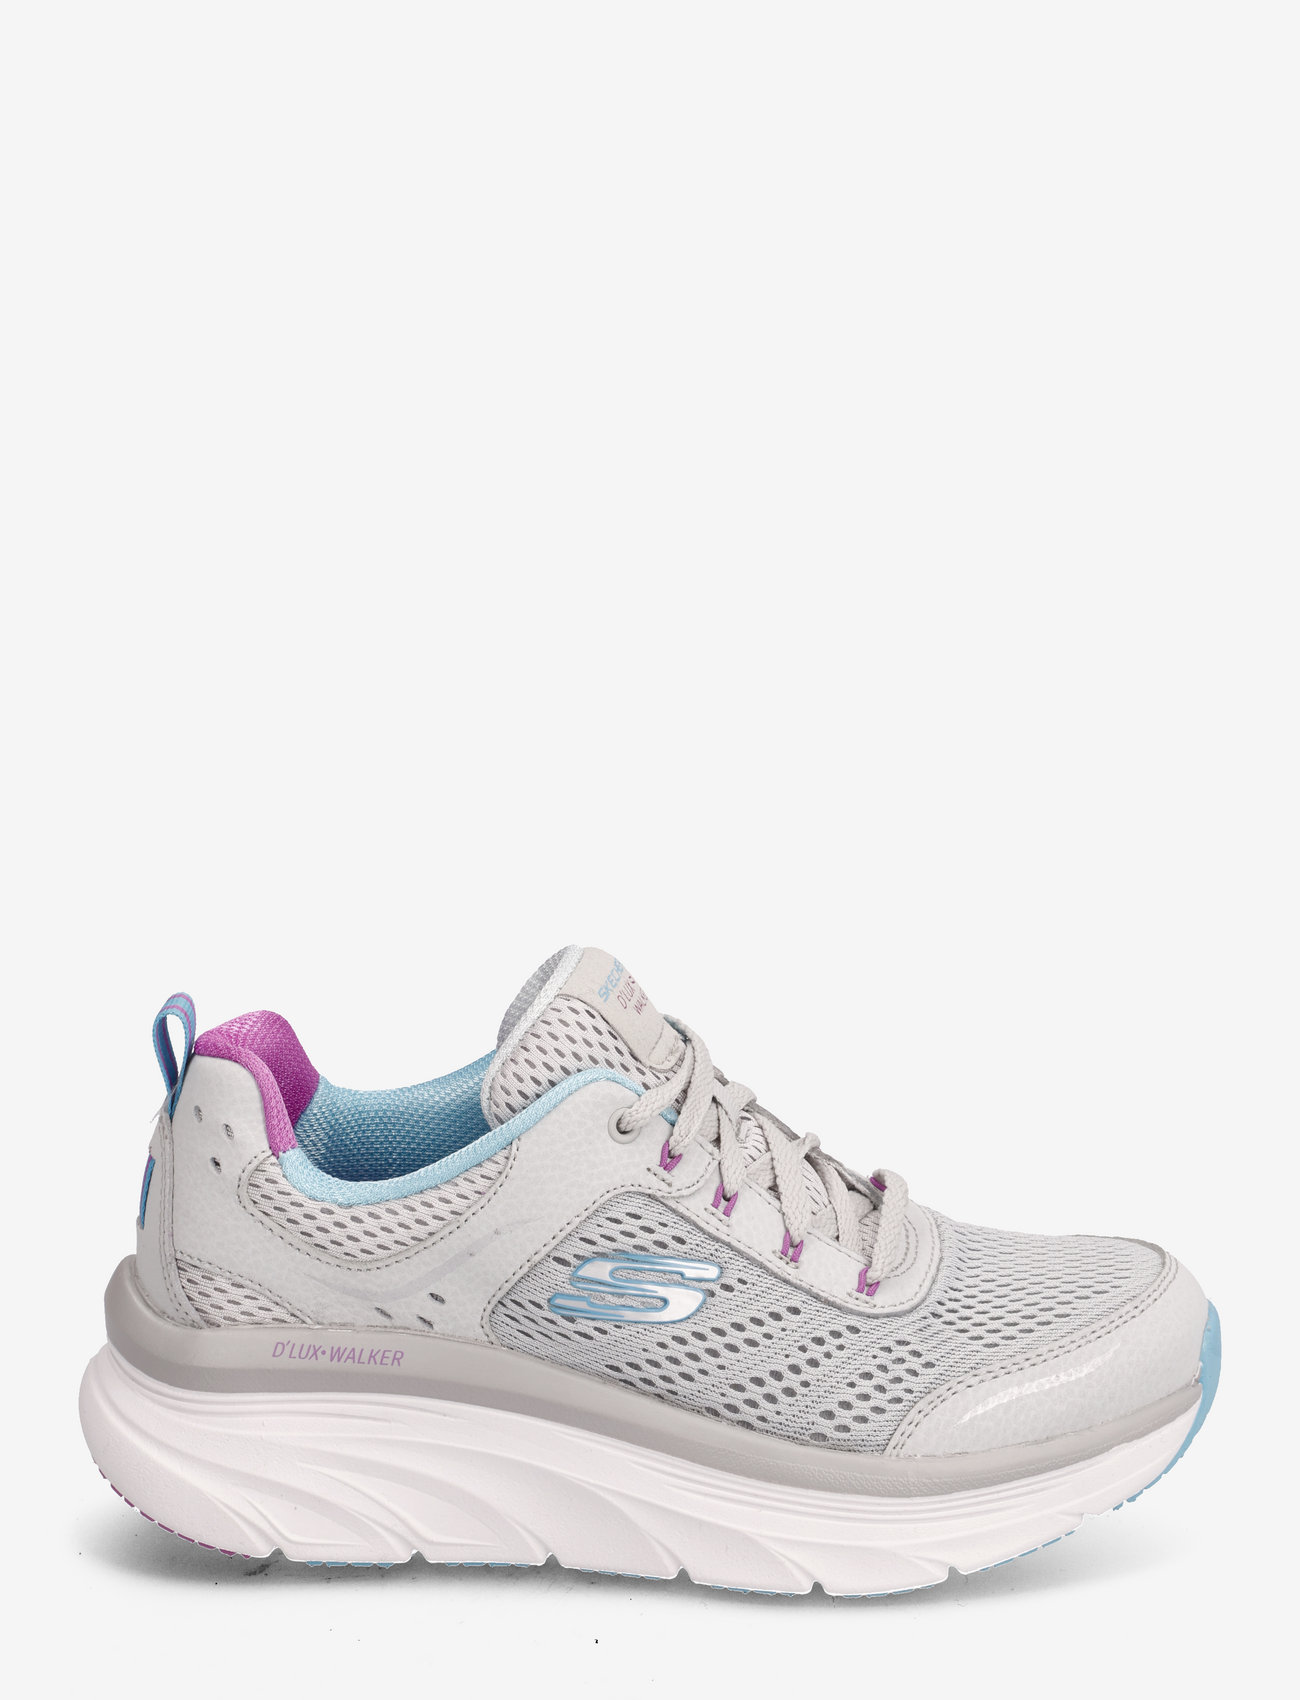 Skechers - Womens Relaxed Fit: D'Lux Walker - Infinite Motion - low top sneakers - lgmt - 1